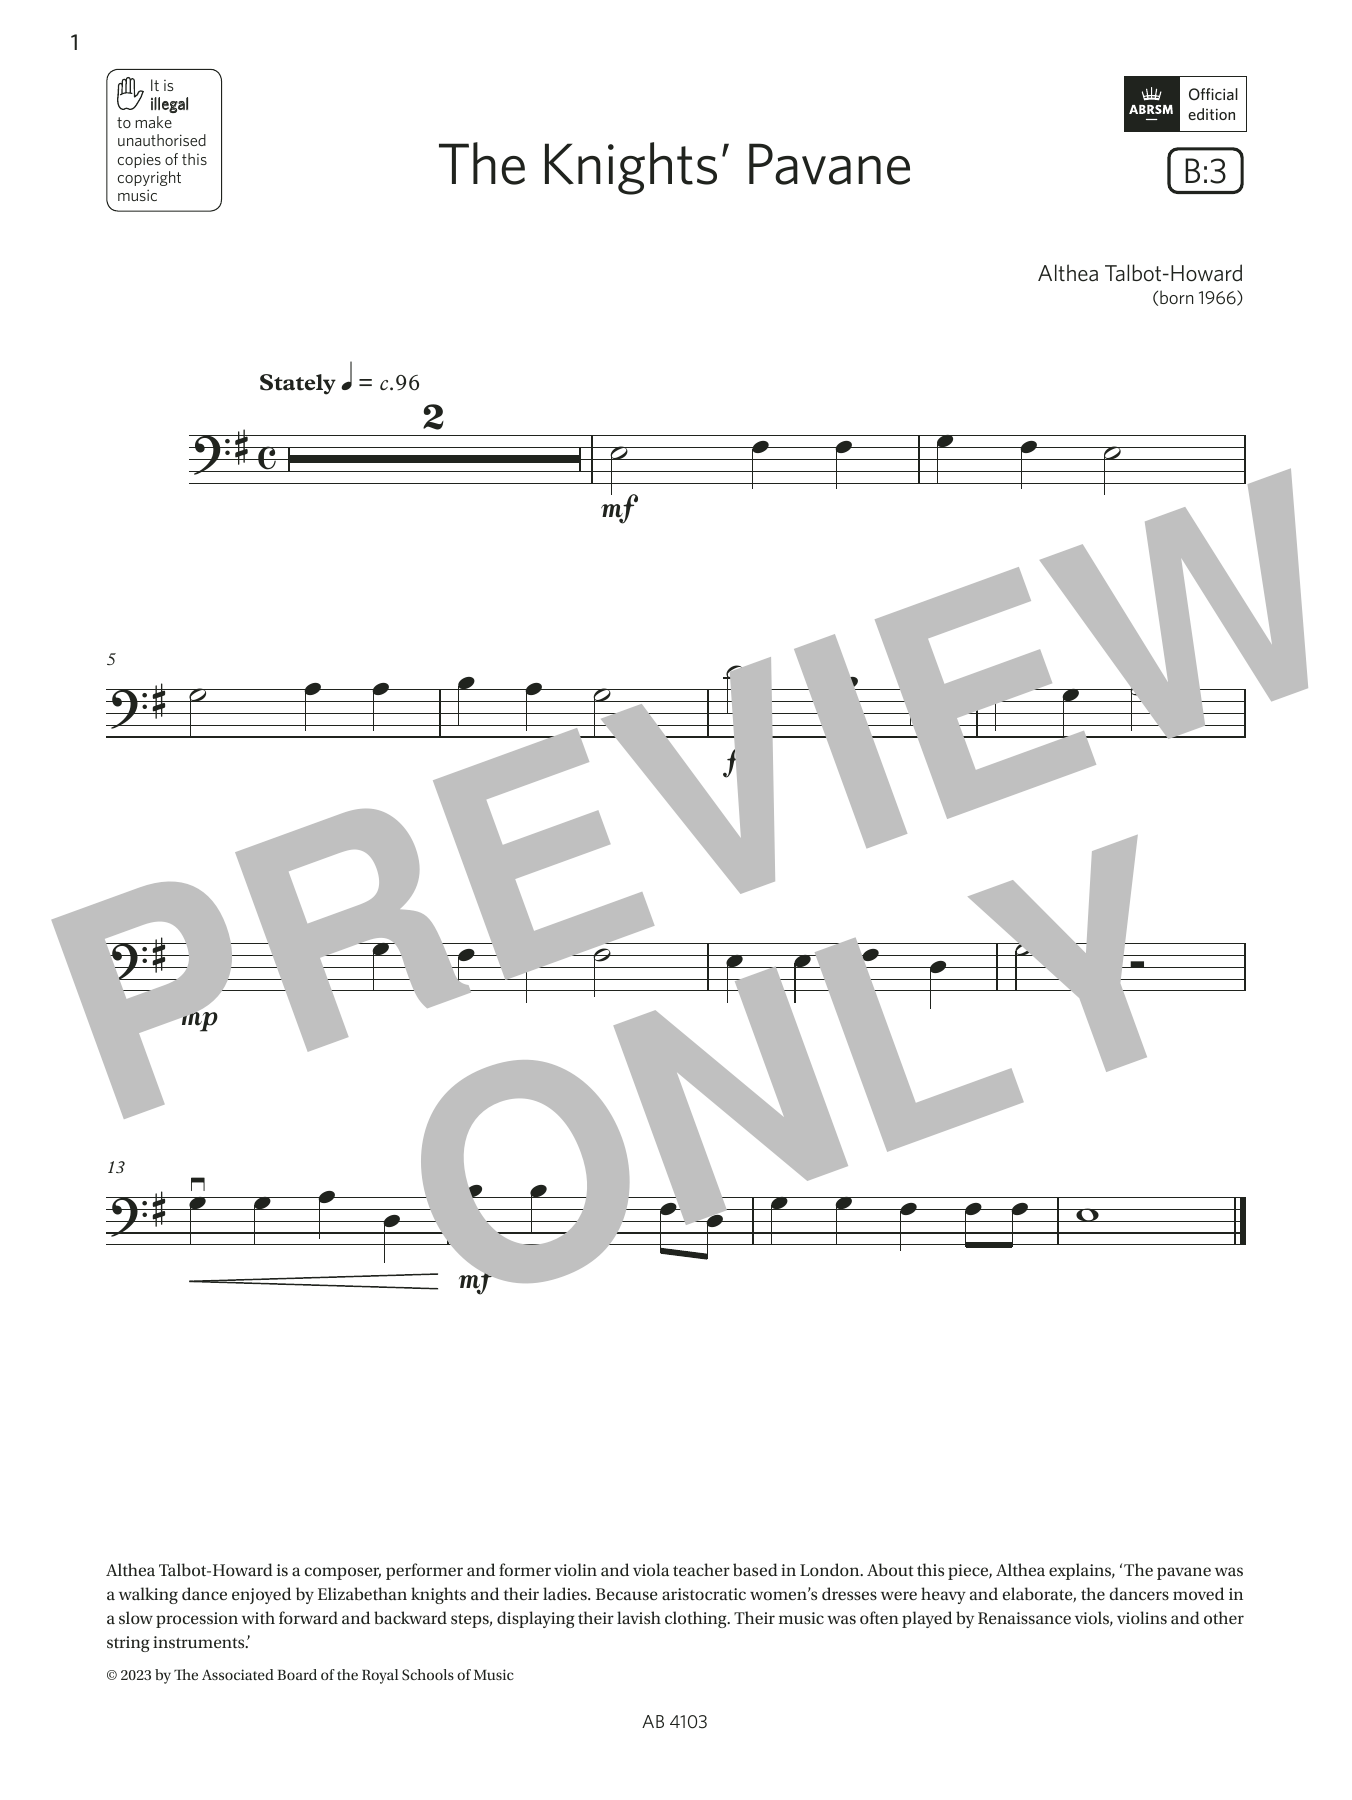 Download Althea Talbot-Howard The Knights' Pavane (Grade Initial, B3, Sheet Music